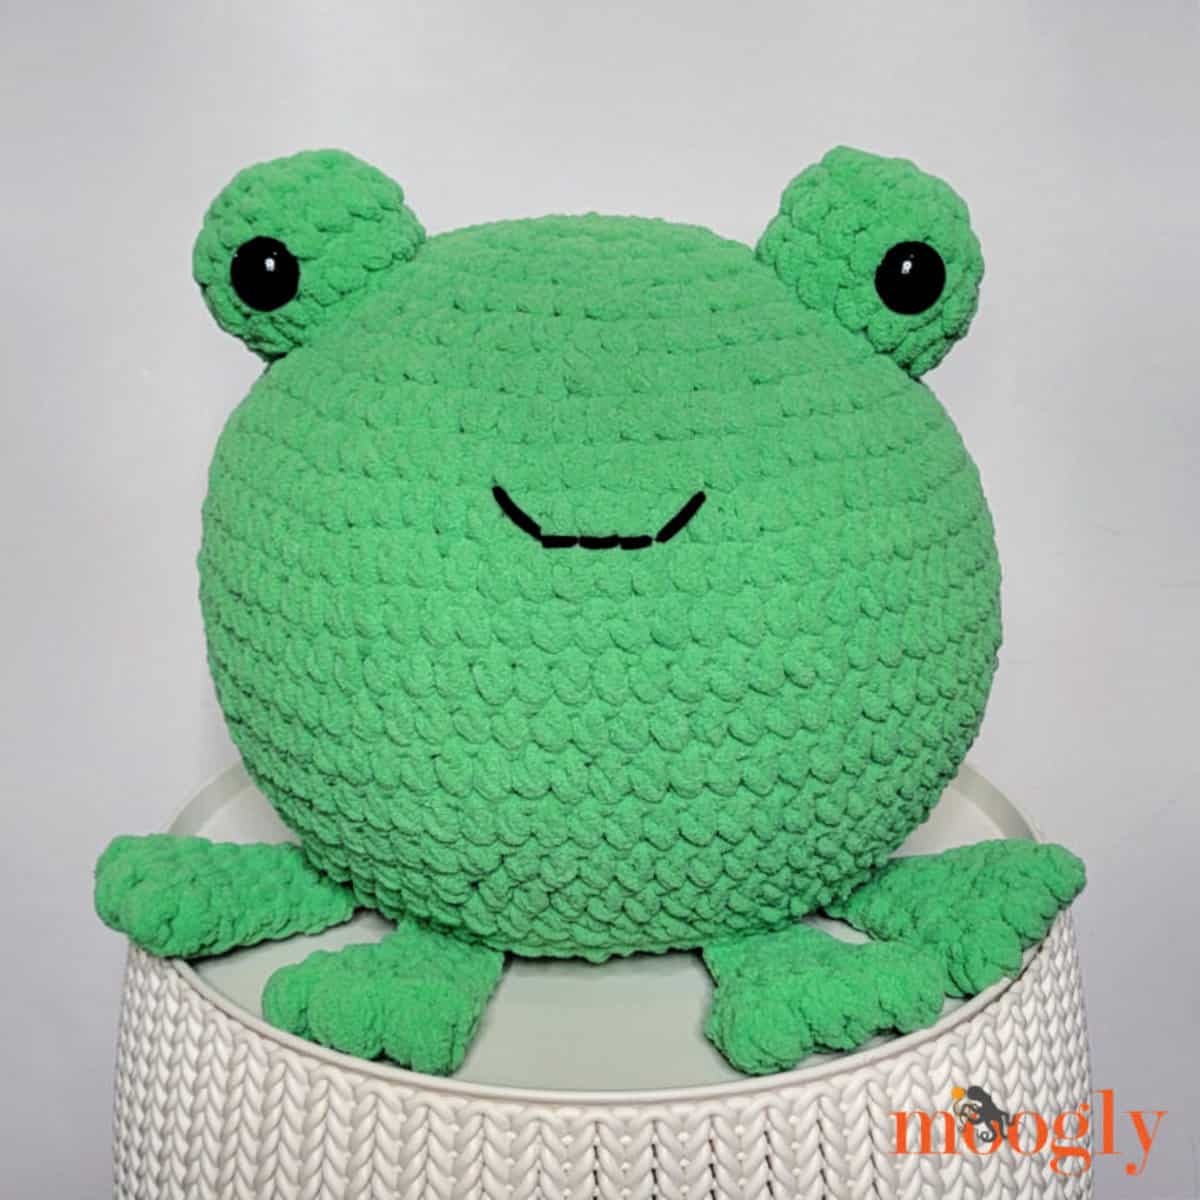 Crocheted large frog.